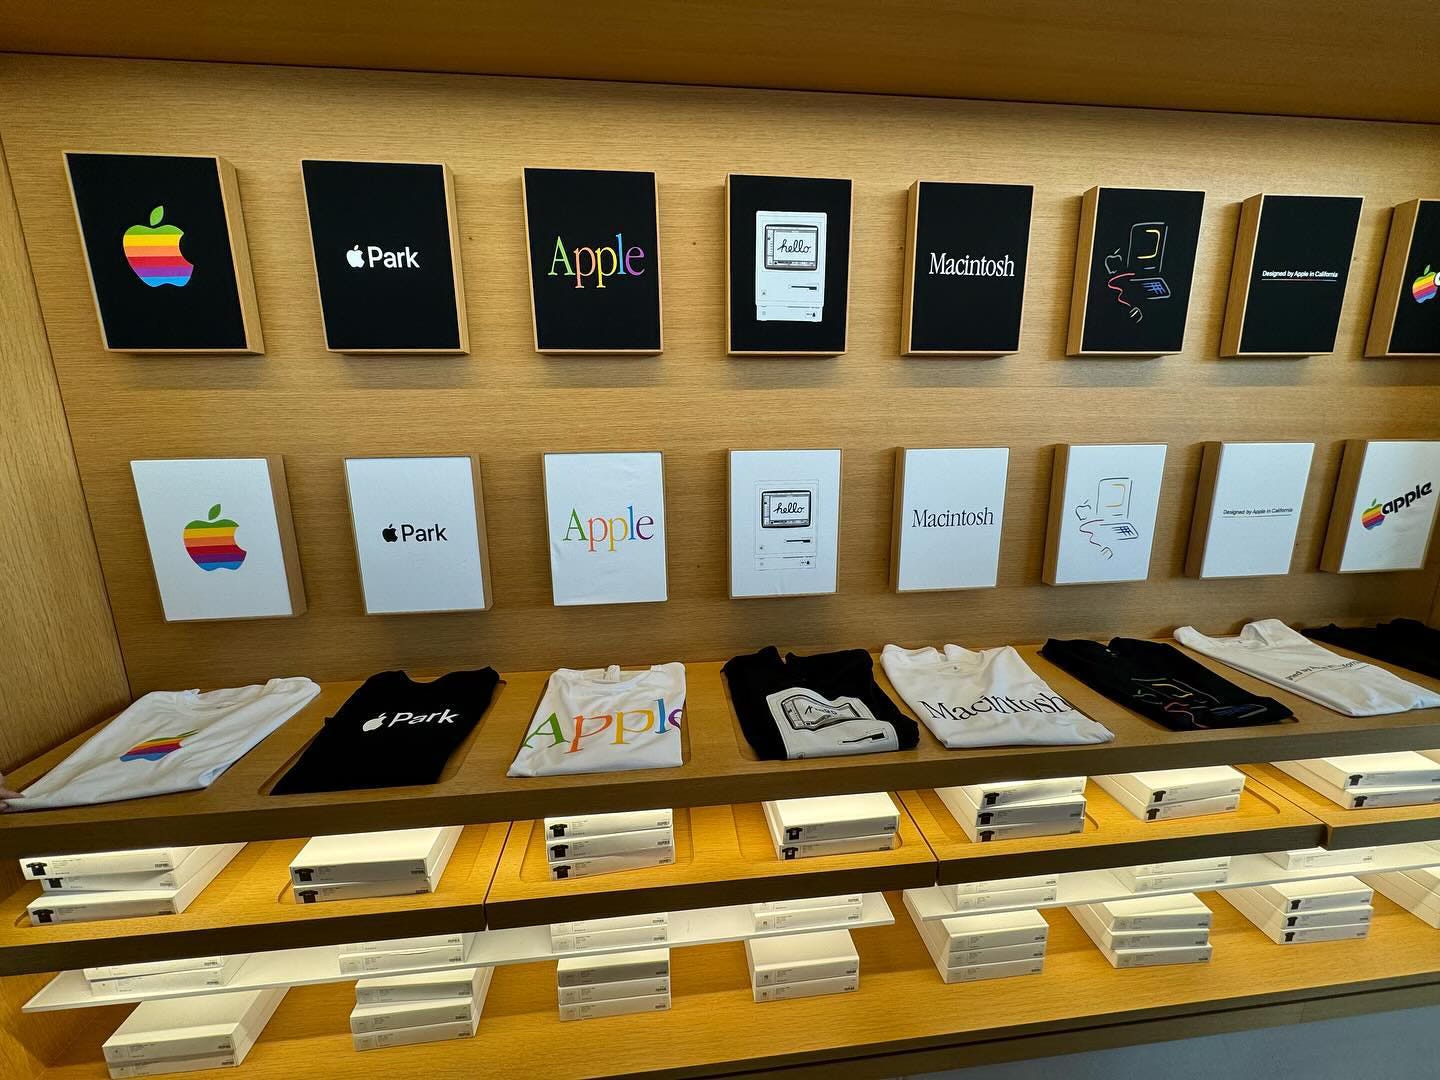 The t-shirt bay at Apple Park Visitor Center. Shirts are offered in white and black across a variety of designs.